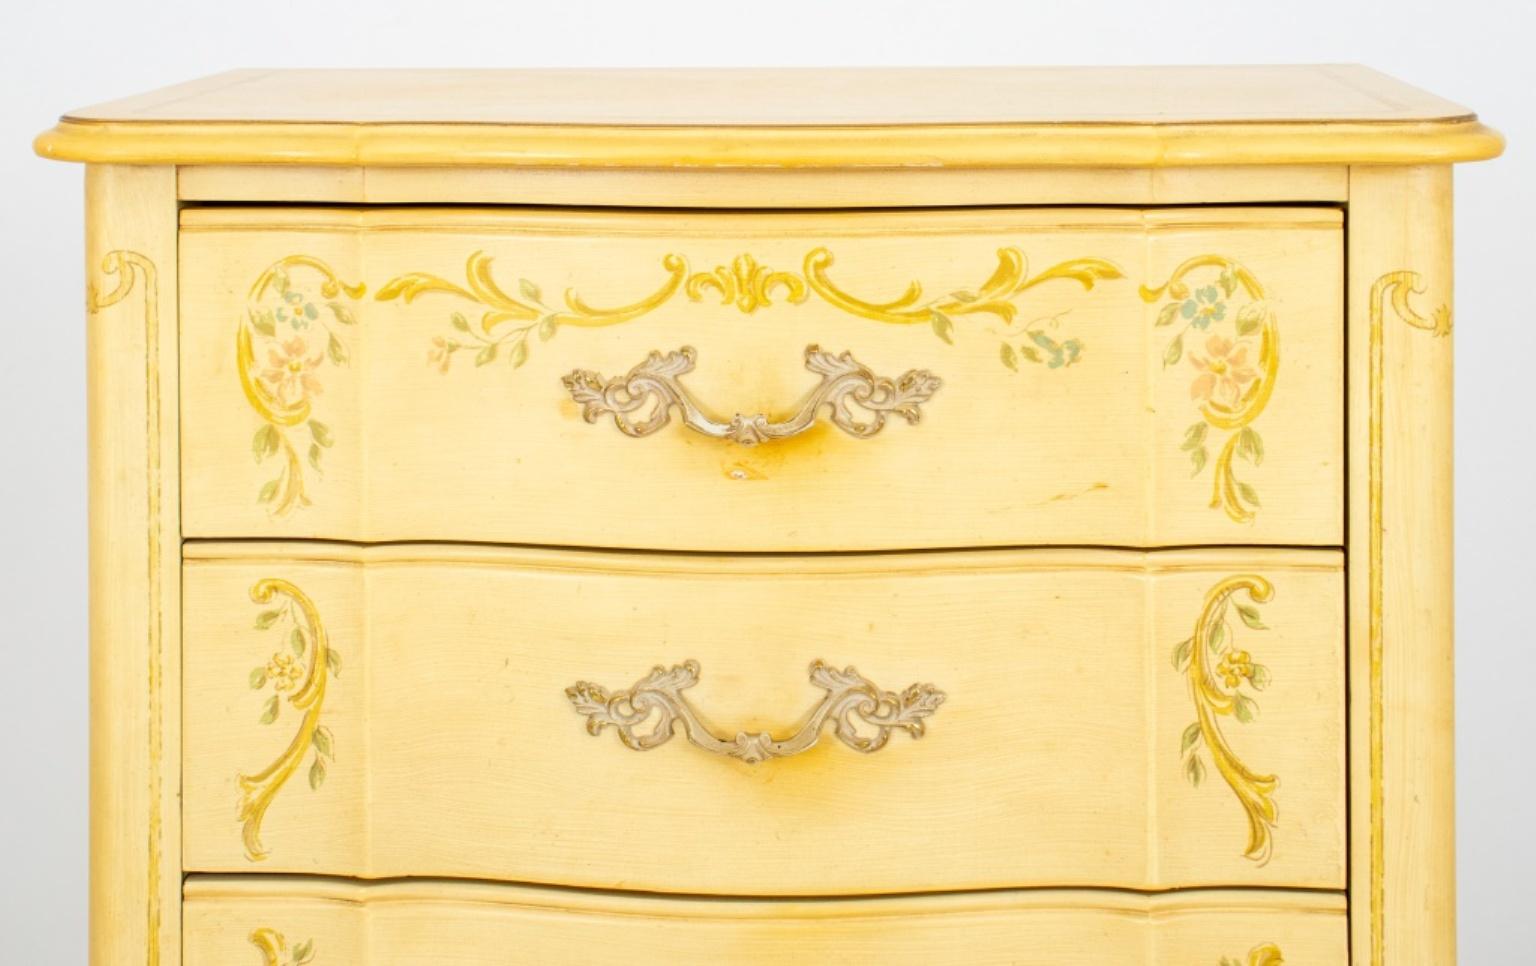 Venetian Rococo Revival lacquered semainier or tall dresser raised on cabriole feet, having seven drawers with rococo gilt metal handles and painted floral and acanthus foliage motifs.

Dimensions: 51